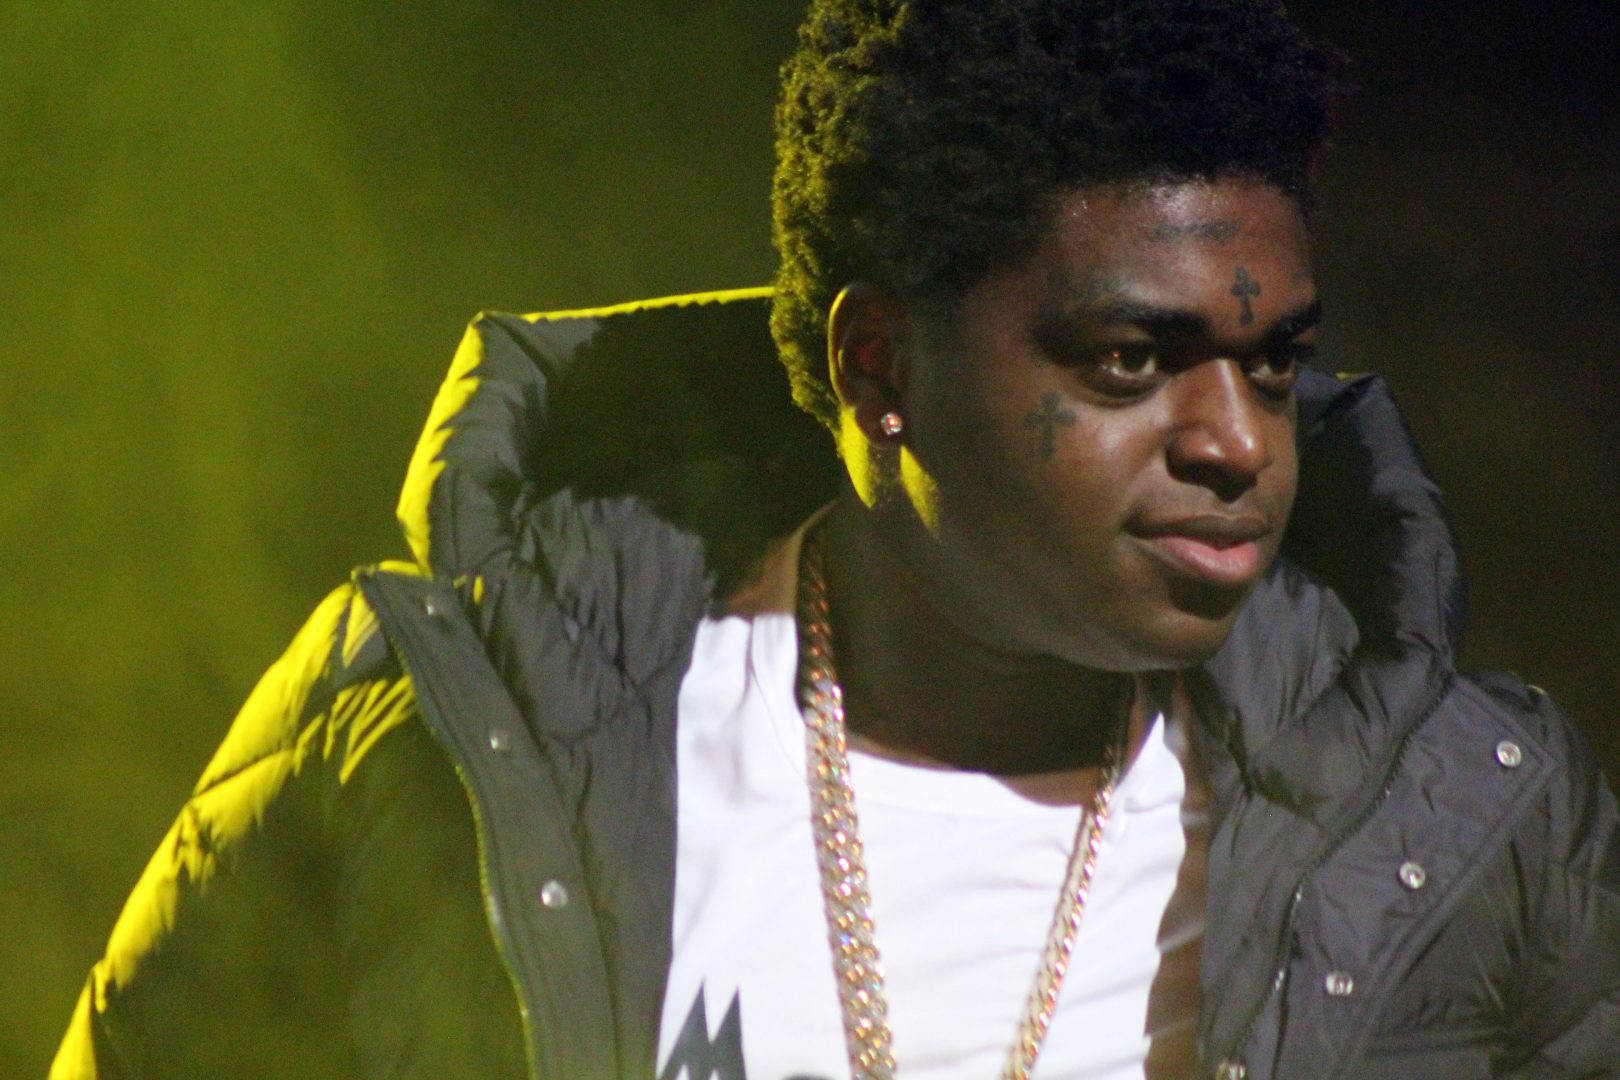 Kodak Black sounds off about his political opinions, again